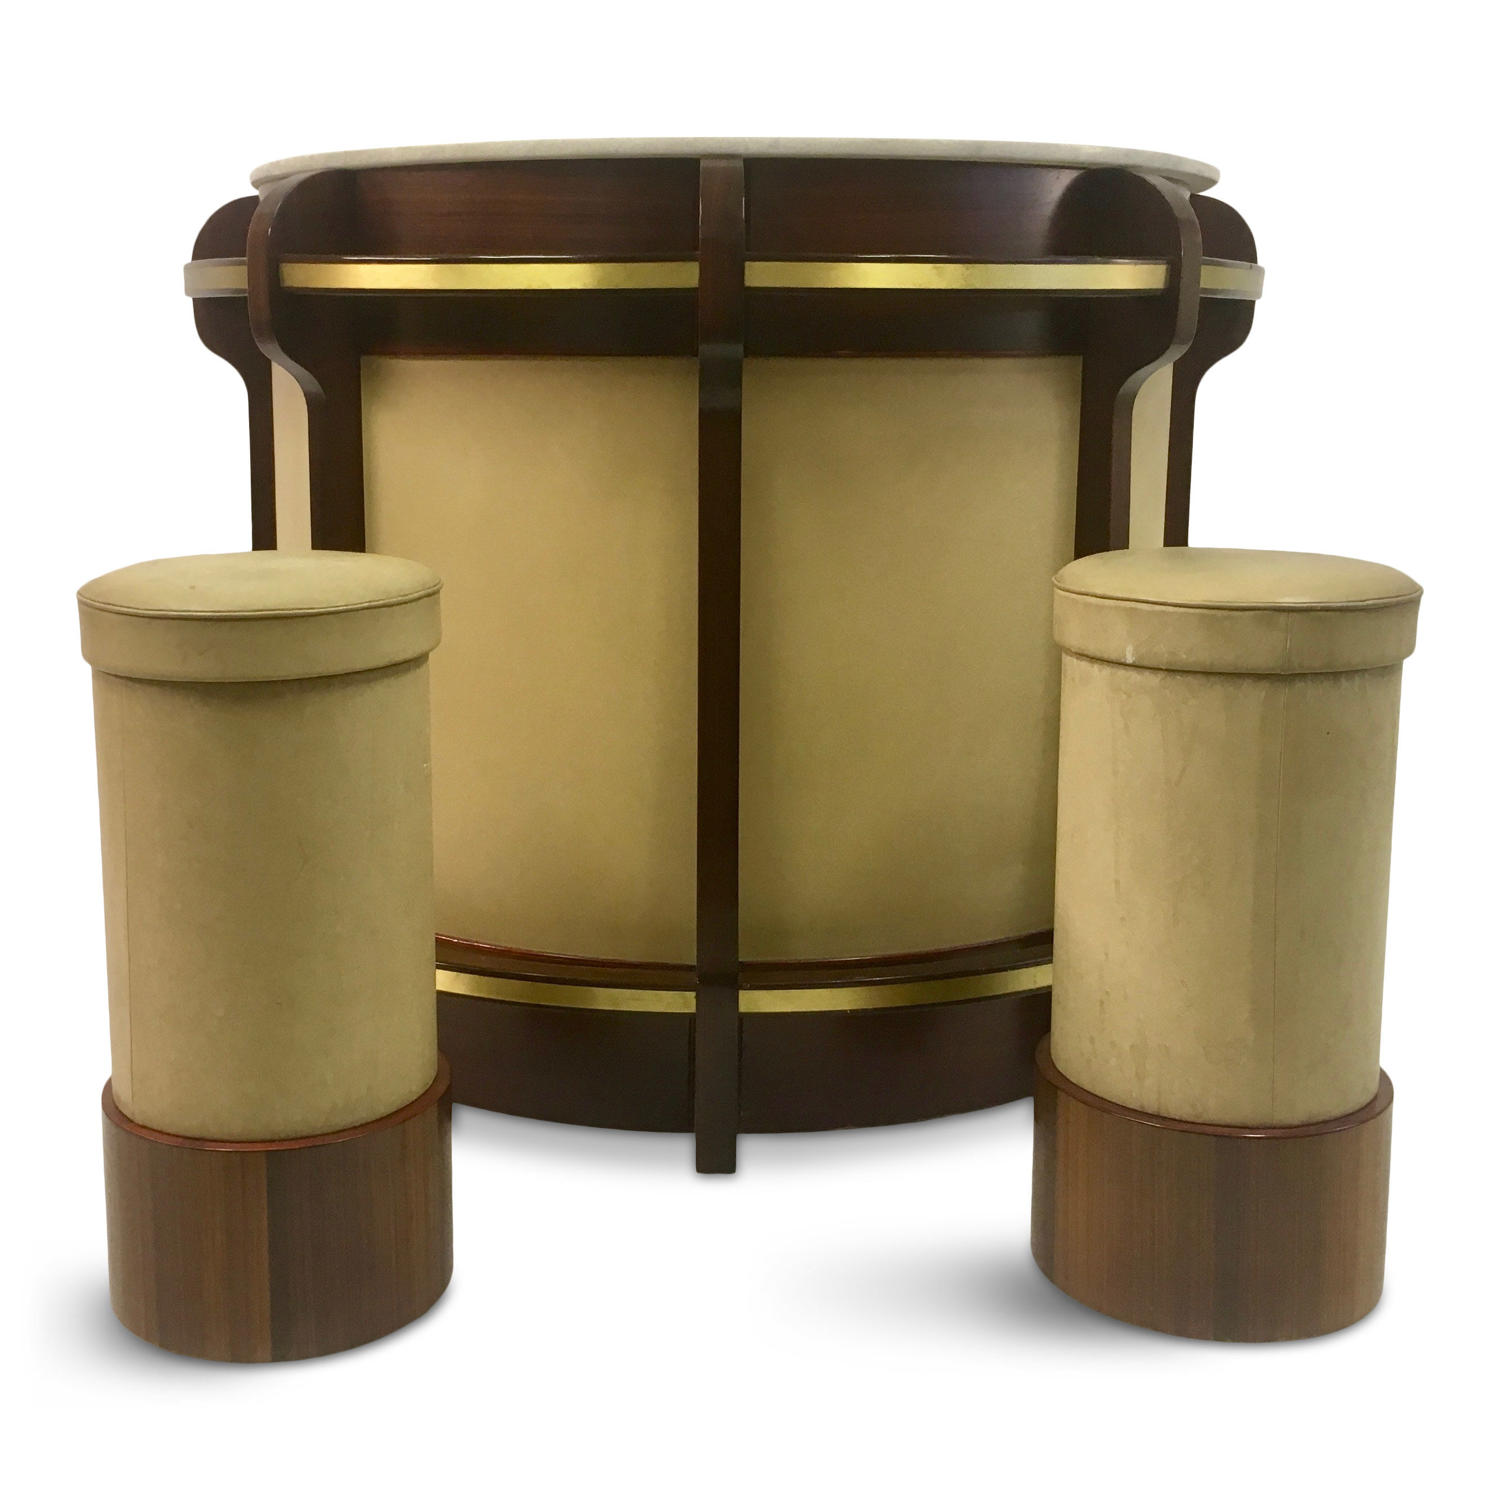 1970s walnut and brass bar and stools by Luciano Frigerio